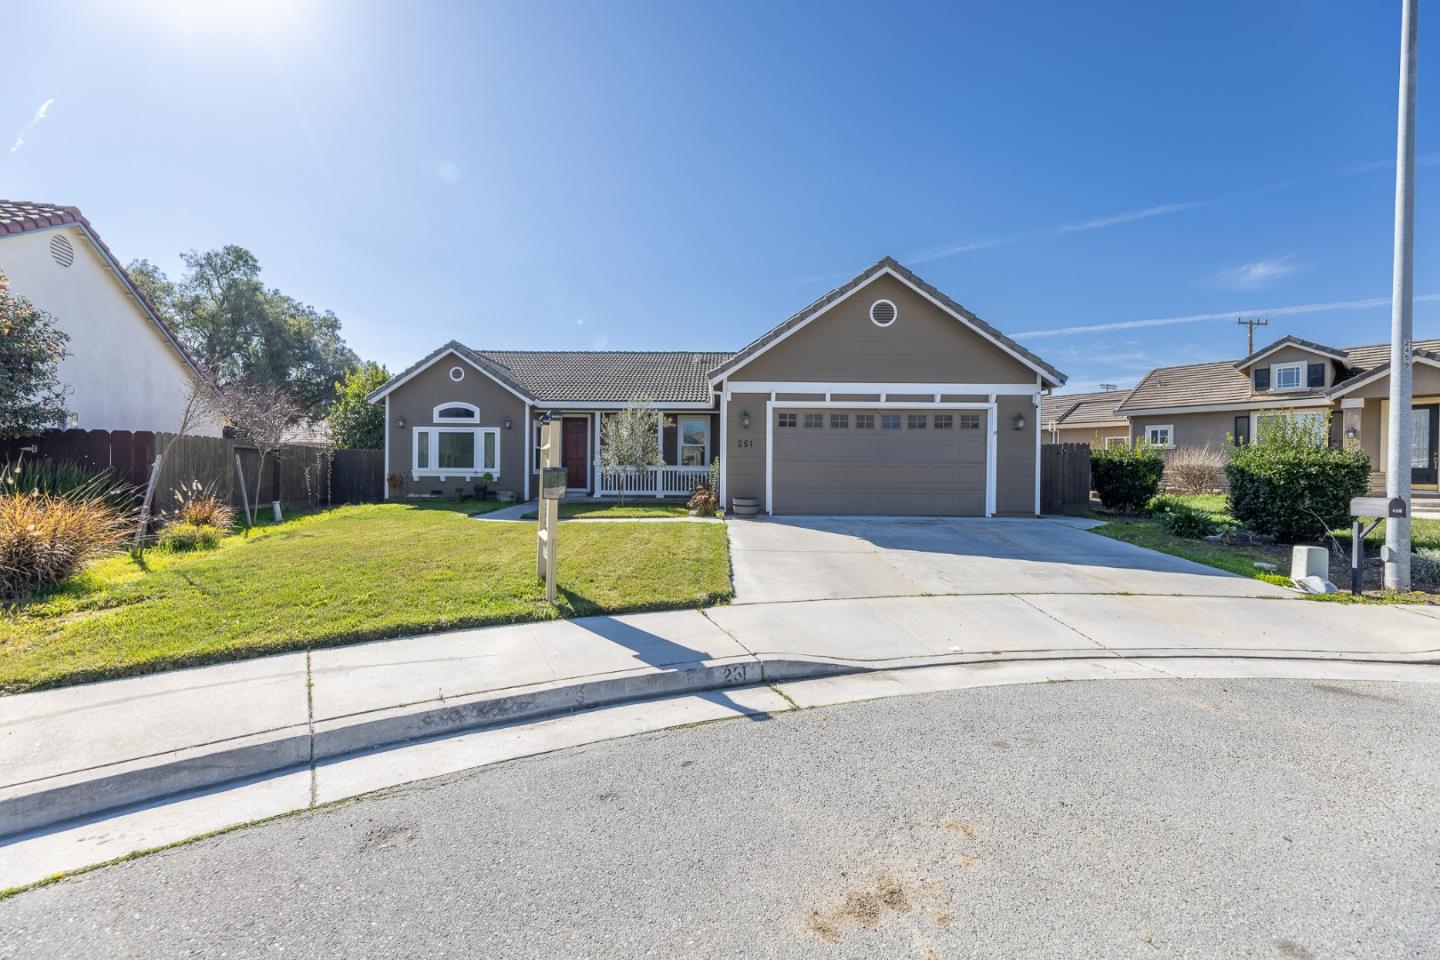 Photo of 251 Bundeson Dr in Hollister, CA